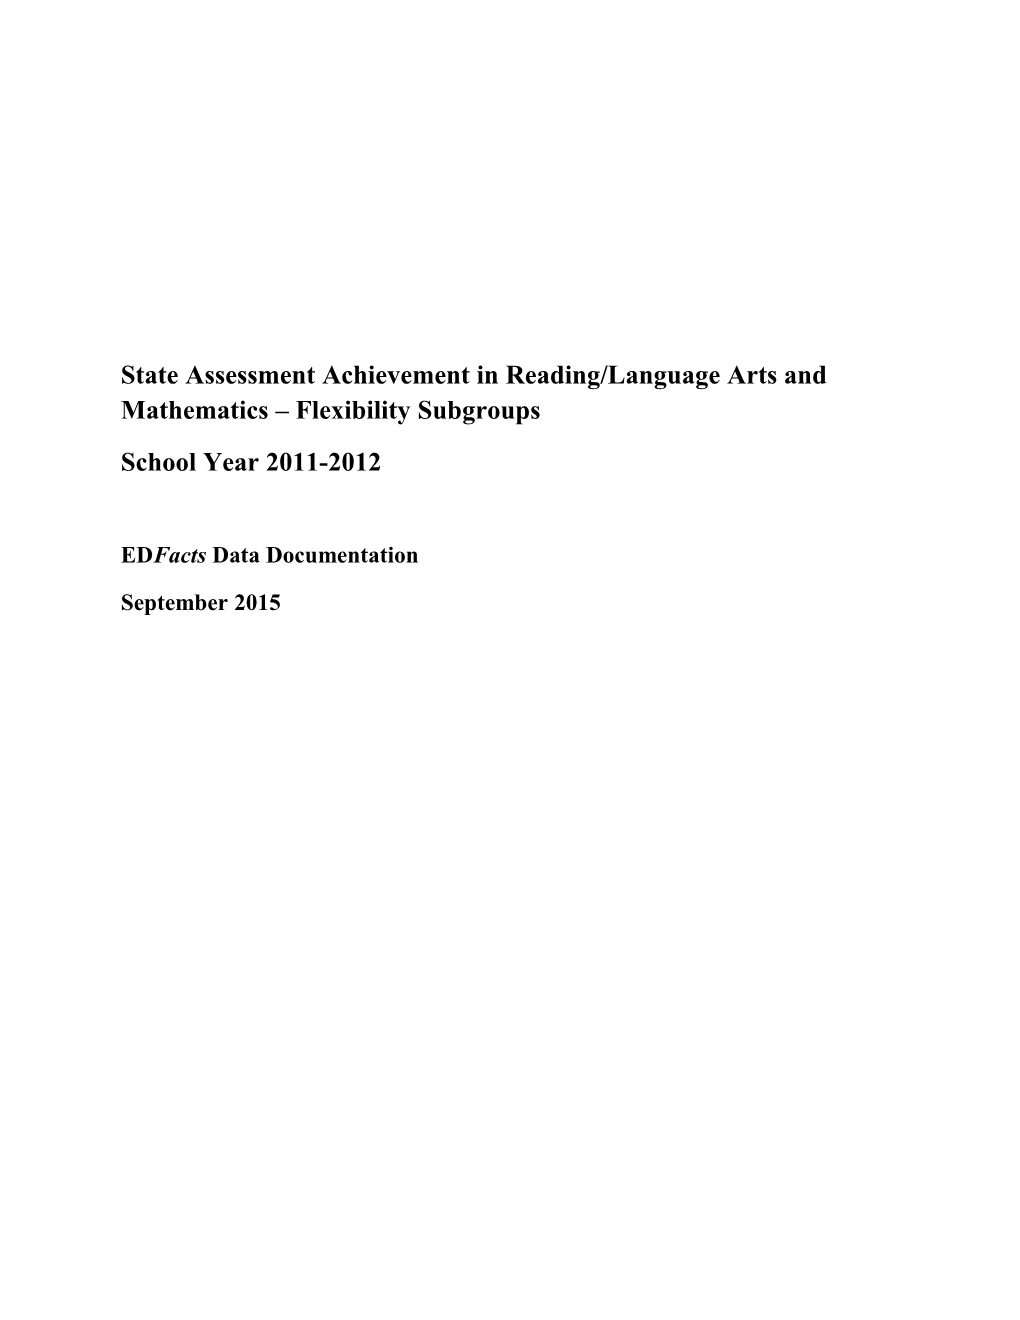 State Assessment Achievement in Reading/Language Arts and Mathematics Flexibility Subgroups